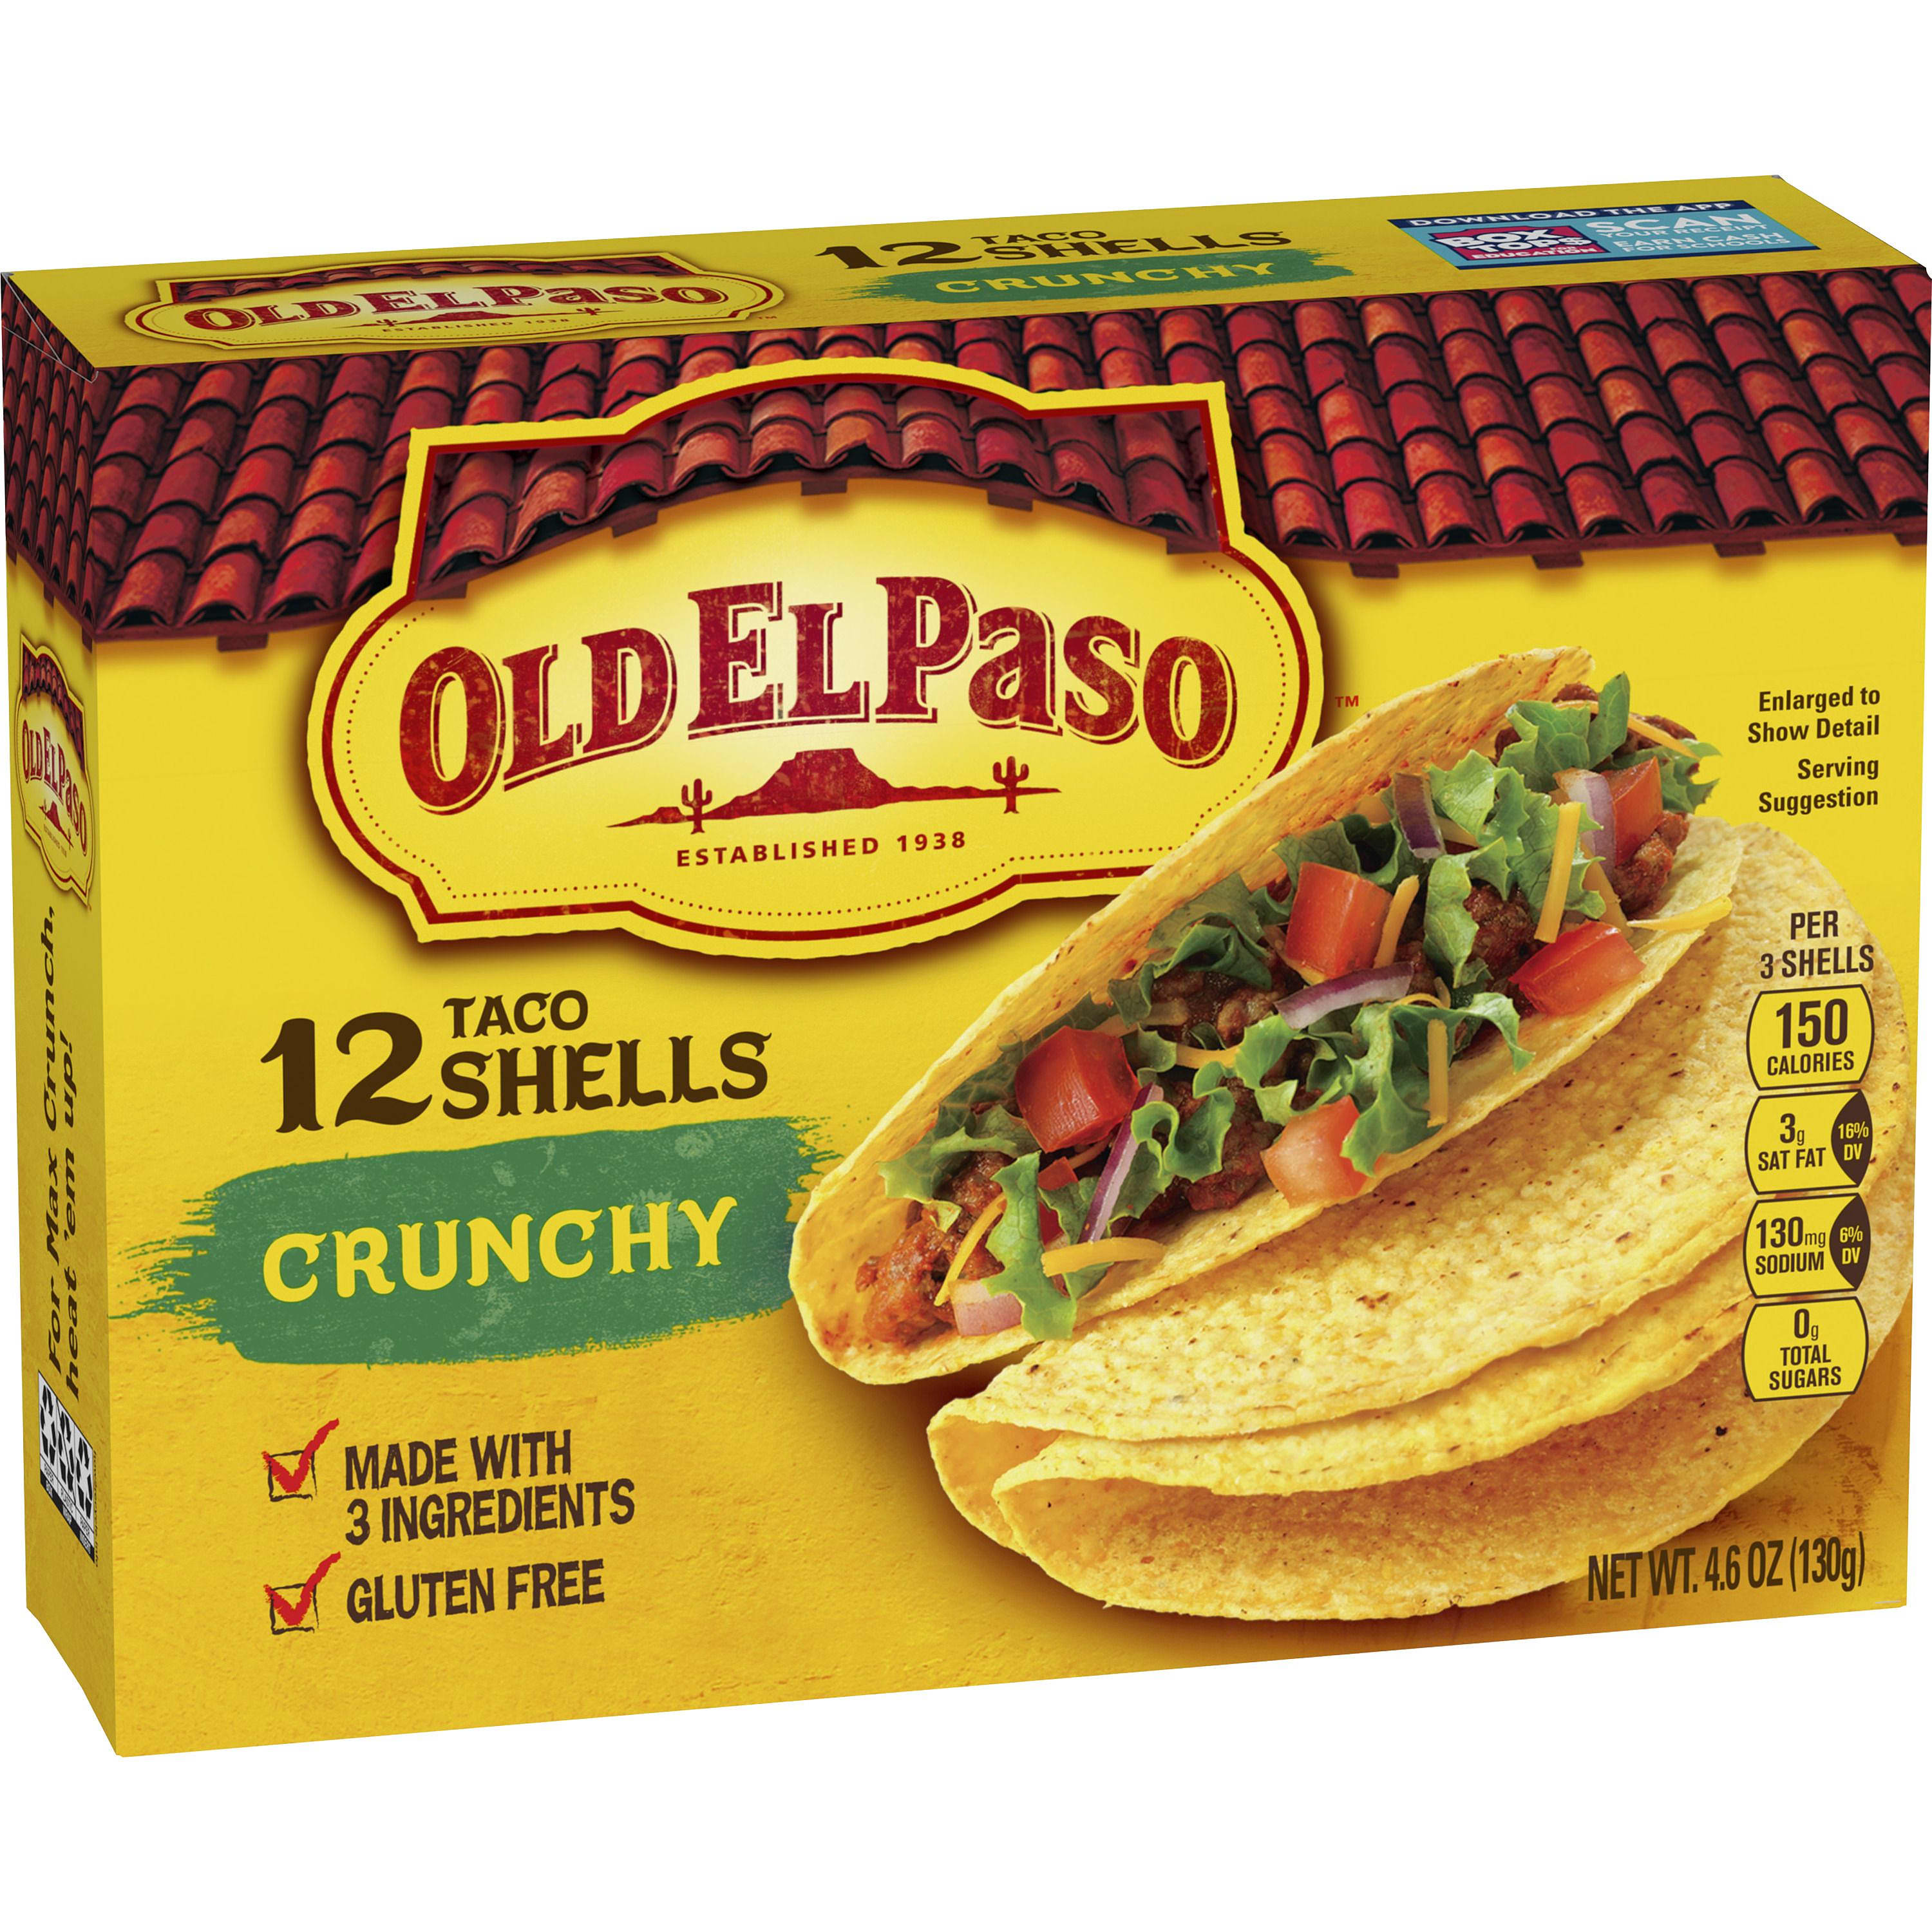 Old El Paso™ Gluten Free Stand 'N Stuff Taco Shells - Family Size